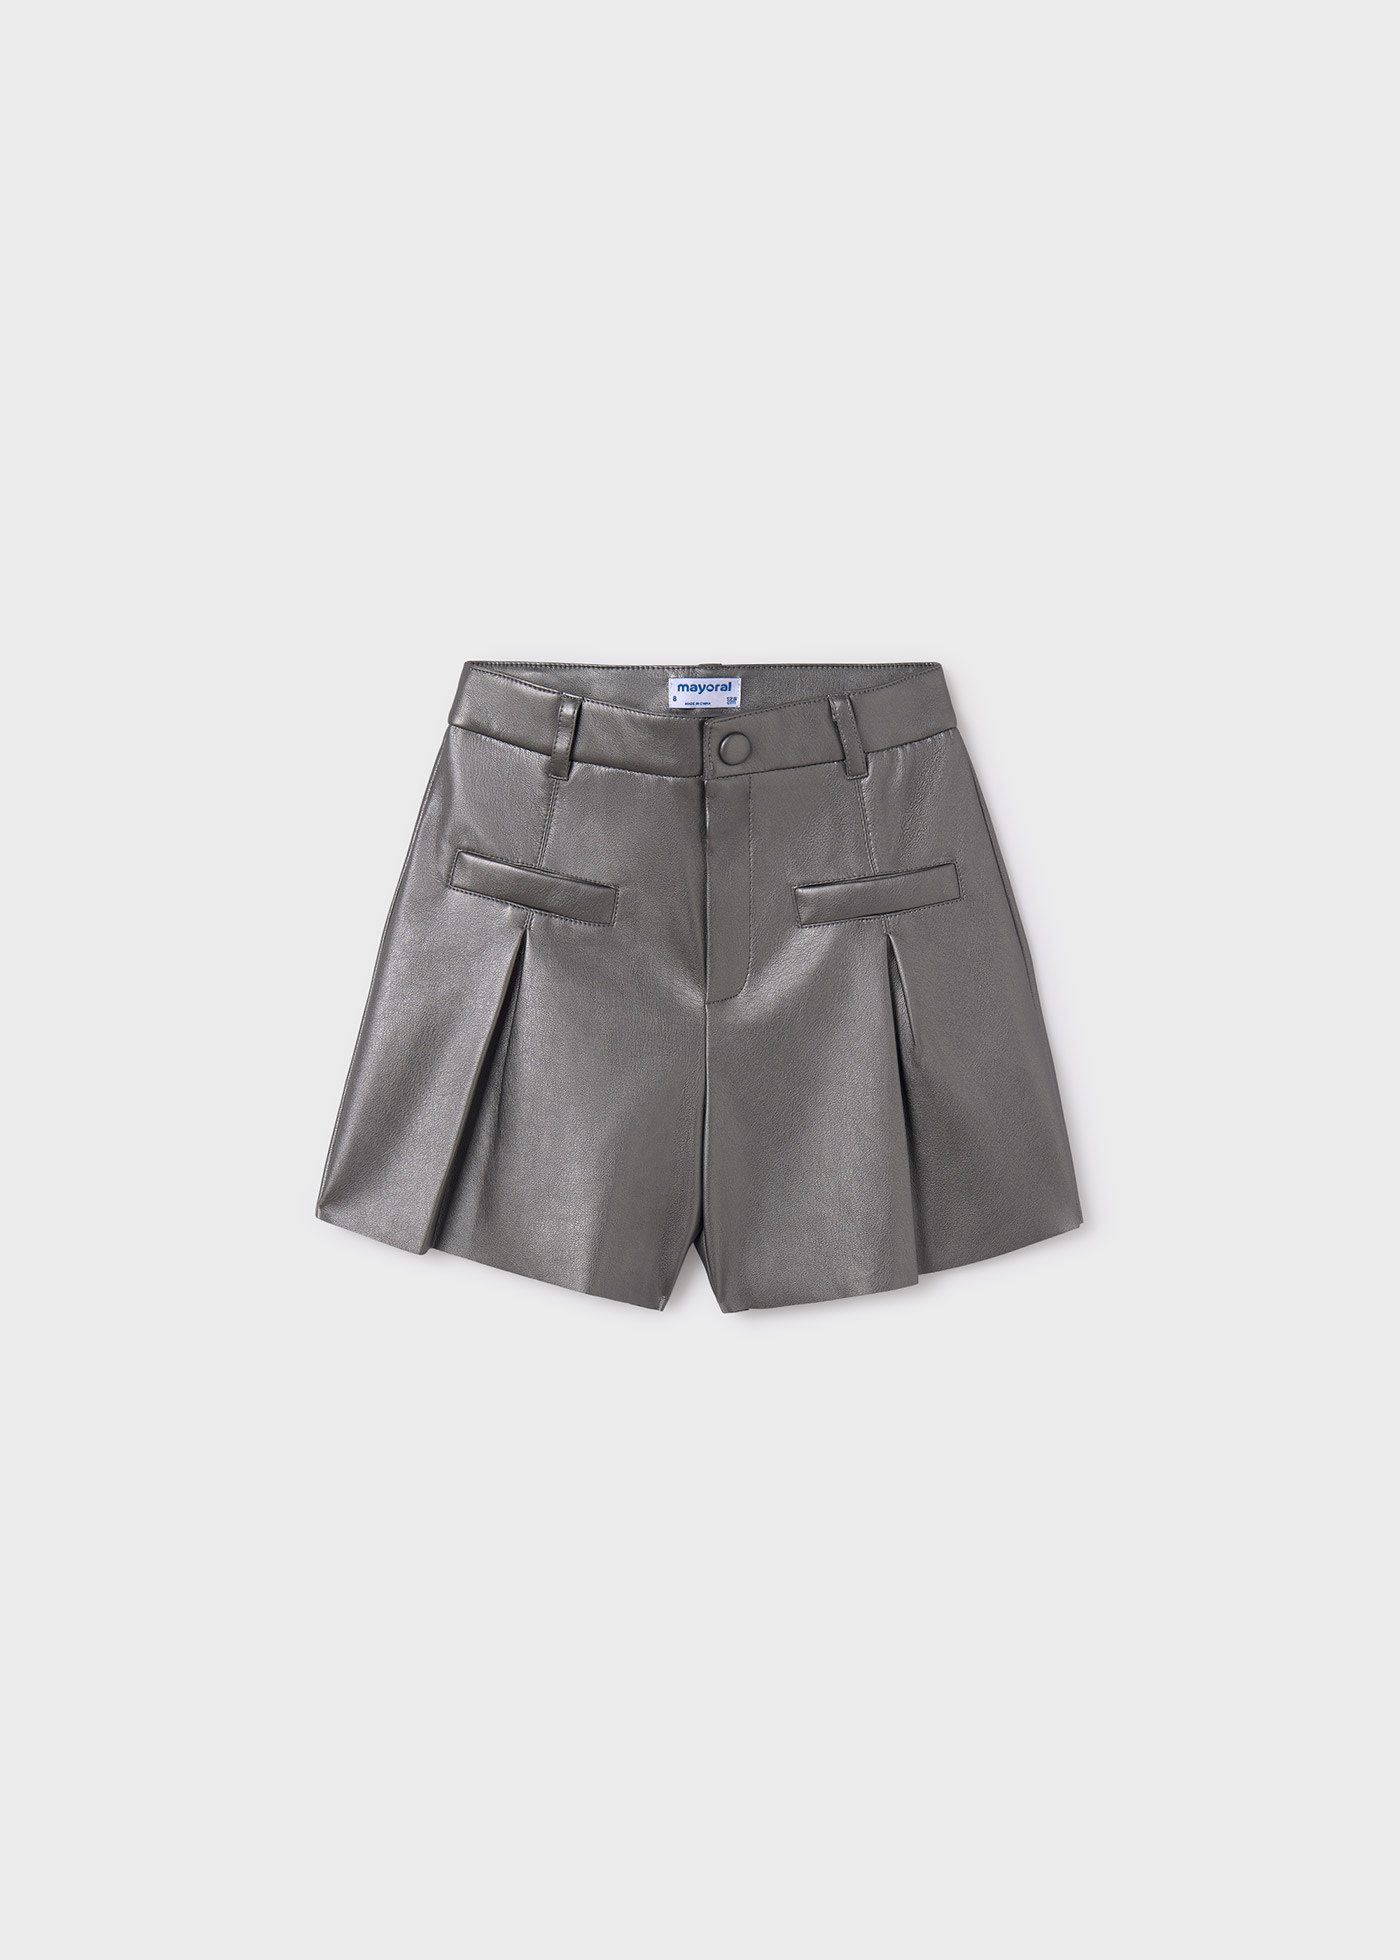 Leatherette shorts for girls